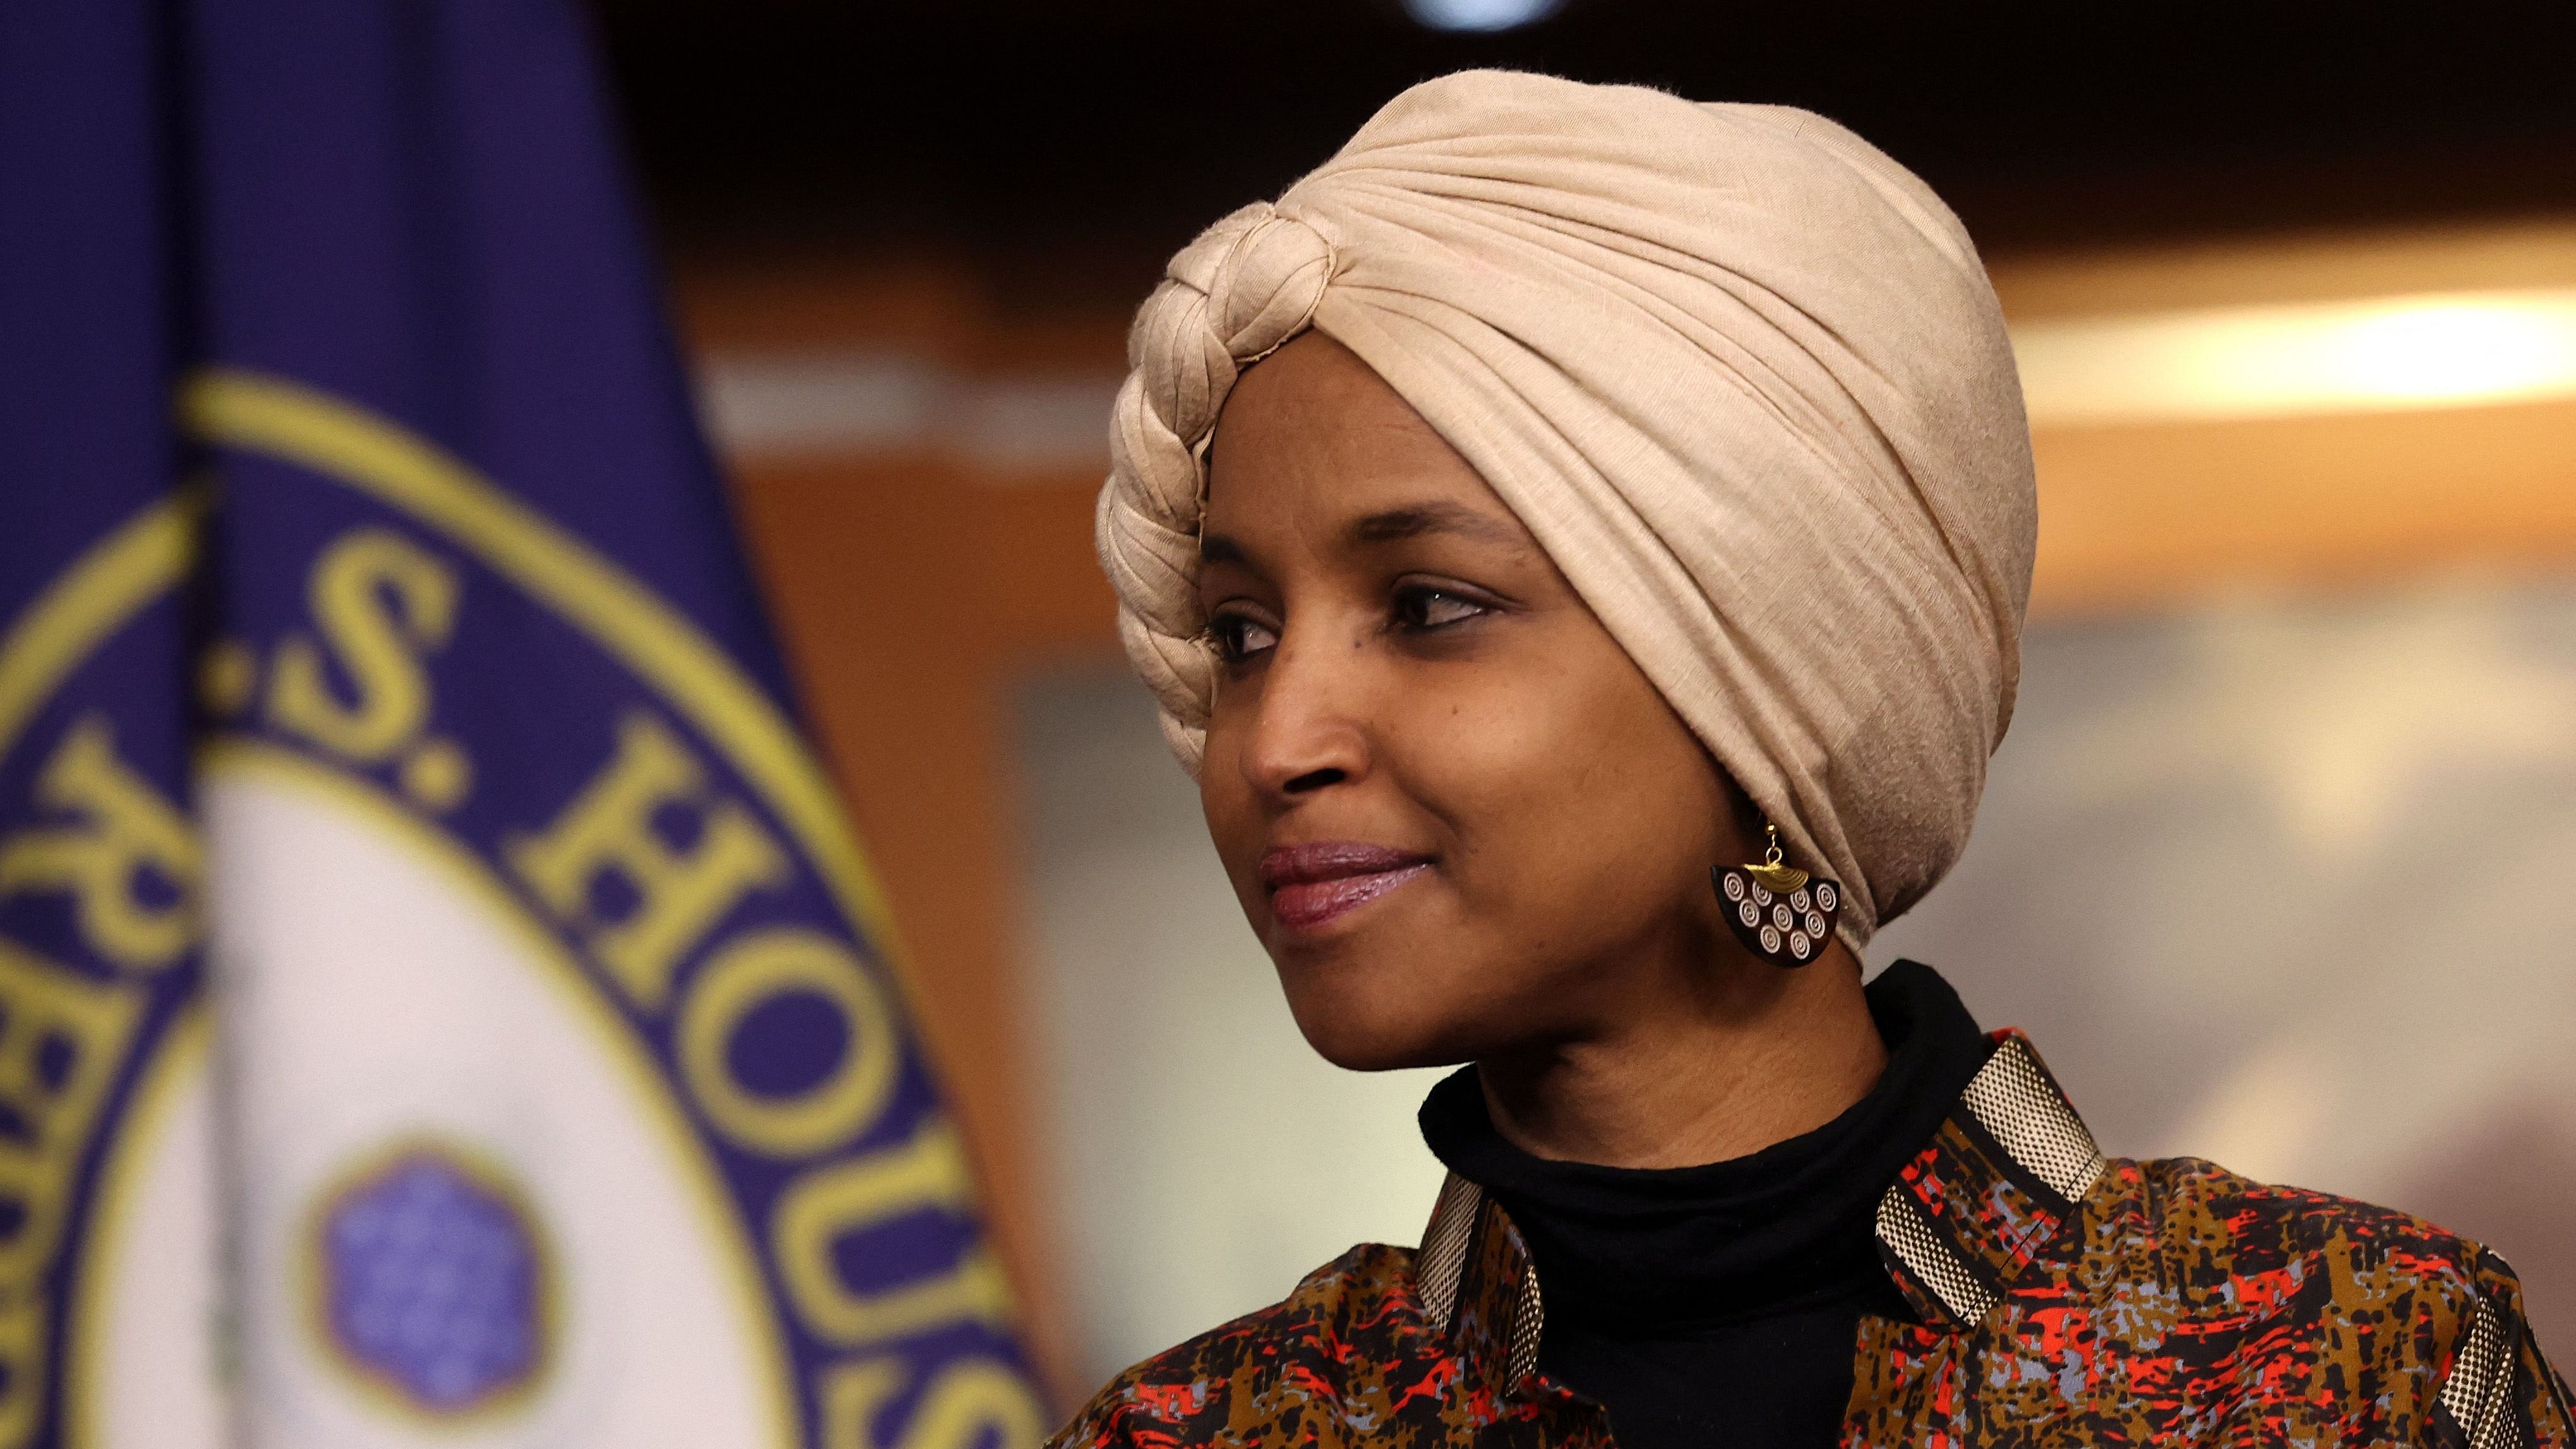  Ilhan Omar. Credit: Getty Images